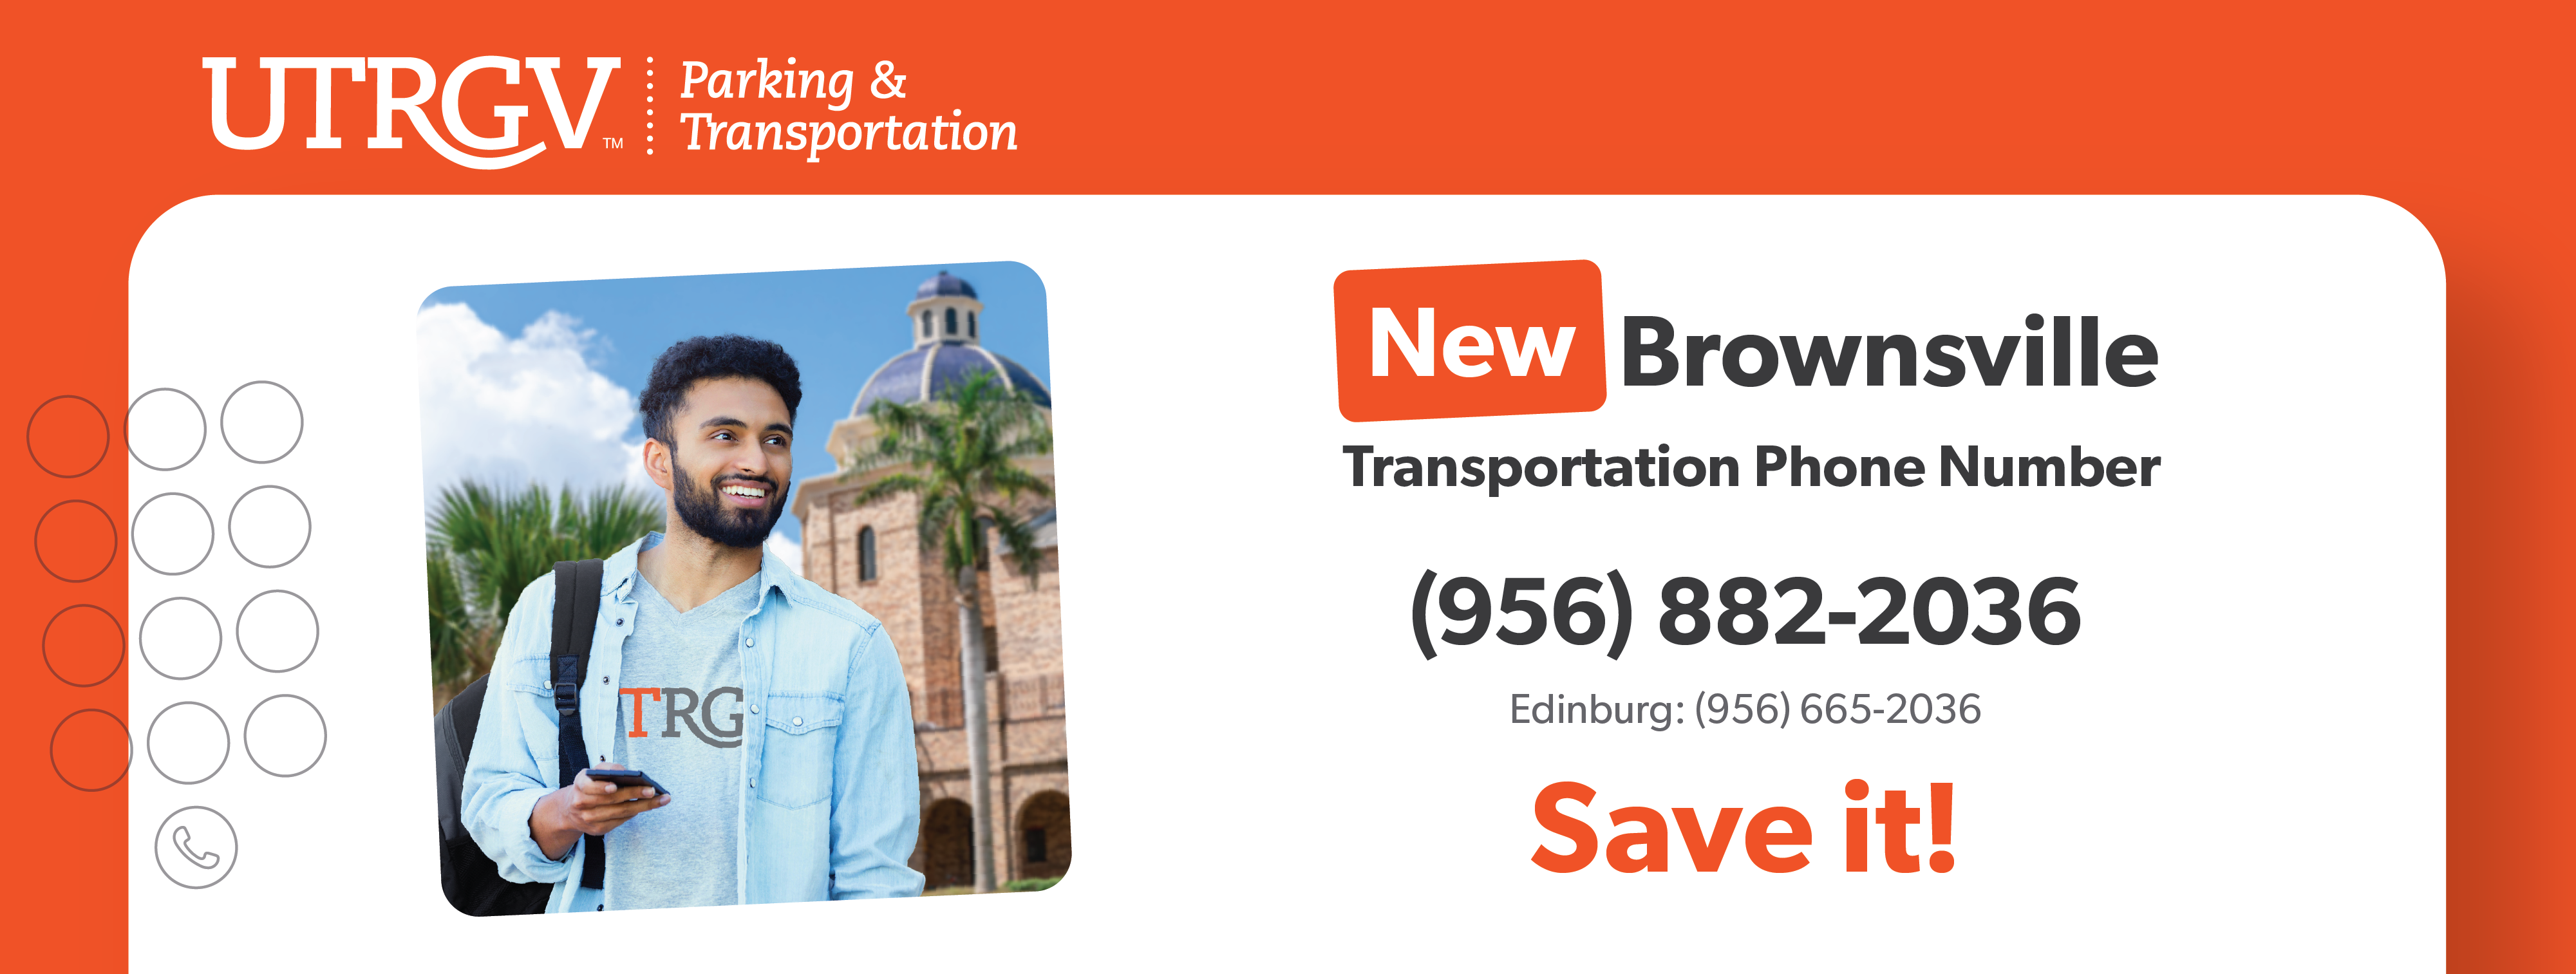 New Brownsville Transportation phone number